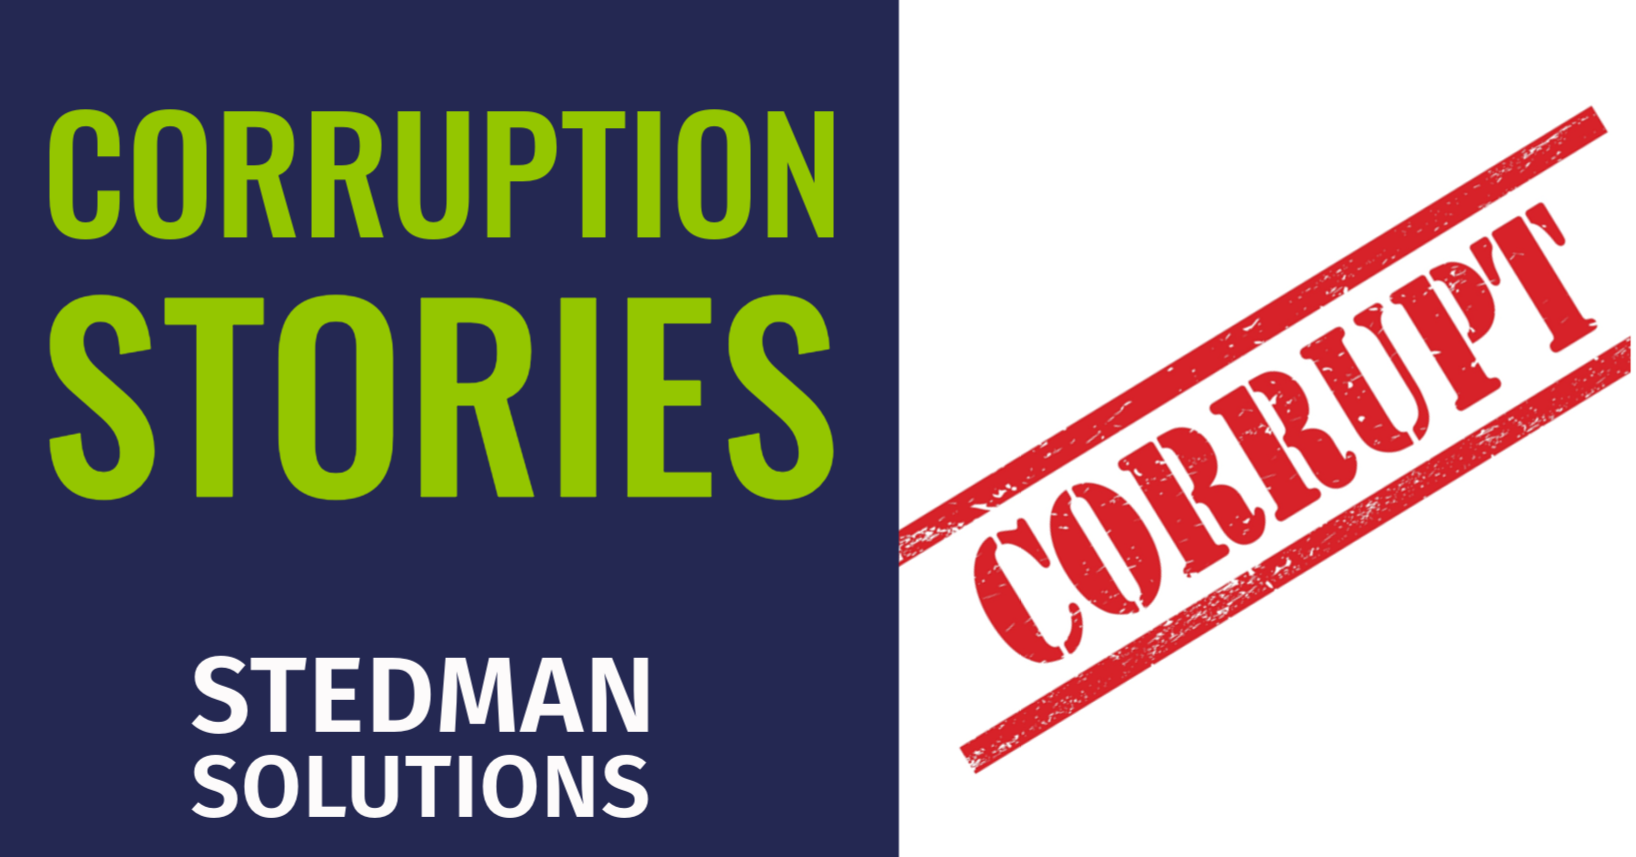 Stories of Corruption